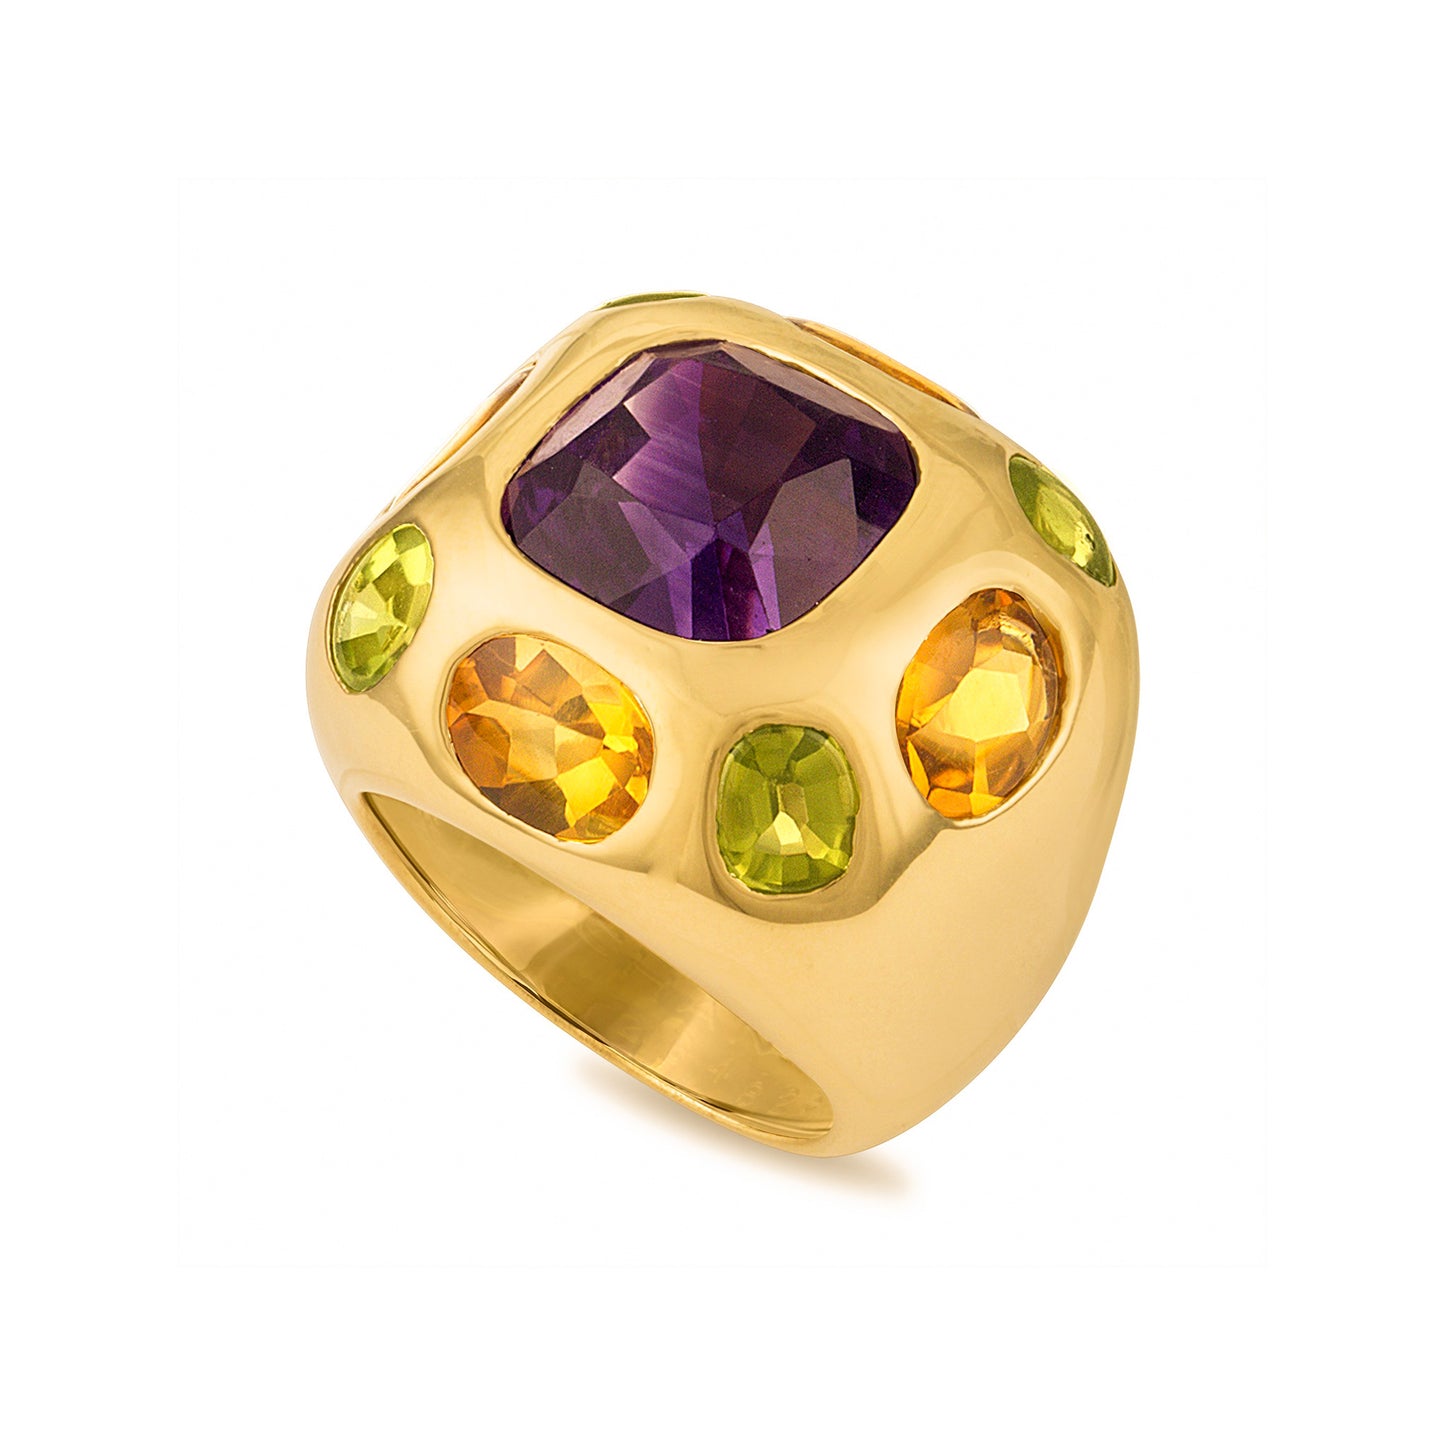 Chanel Coco Baroque Amethyst, Citrine and Peridot Ring Size 4